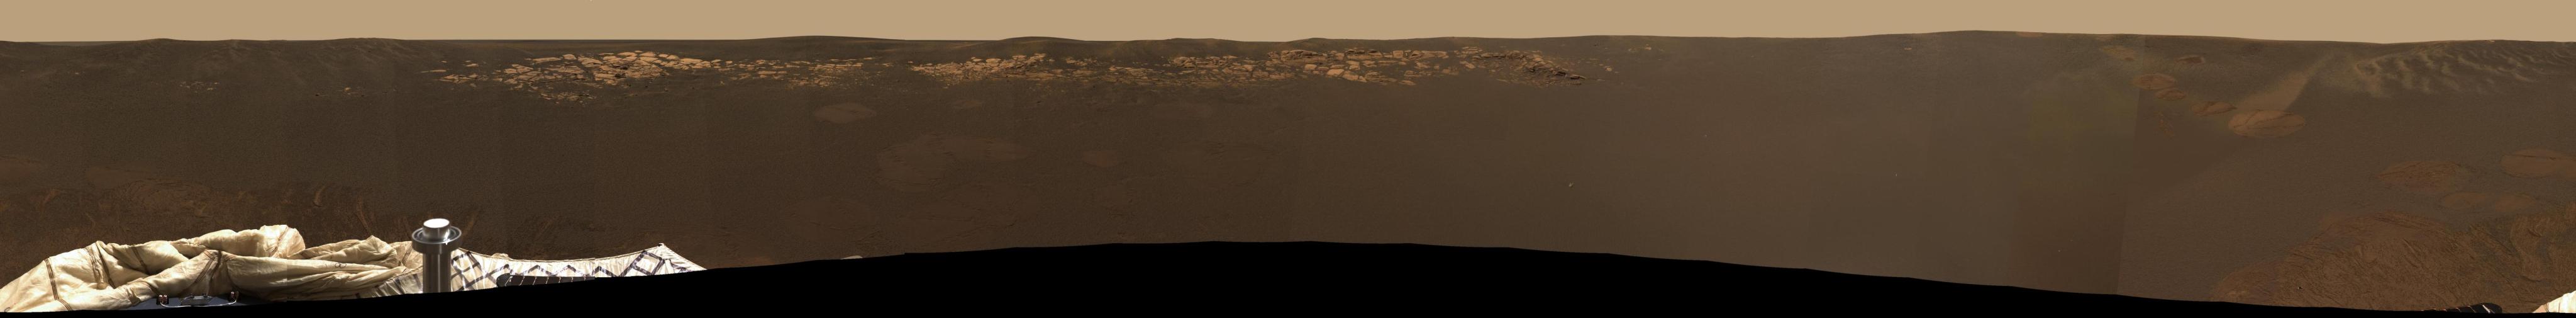 This expansive view of the martian real estate surrounding the Mars Exploration Rover Opportunity is the first 360 degree, high-resolution color image taken by the rover's panoramic camera.